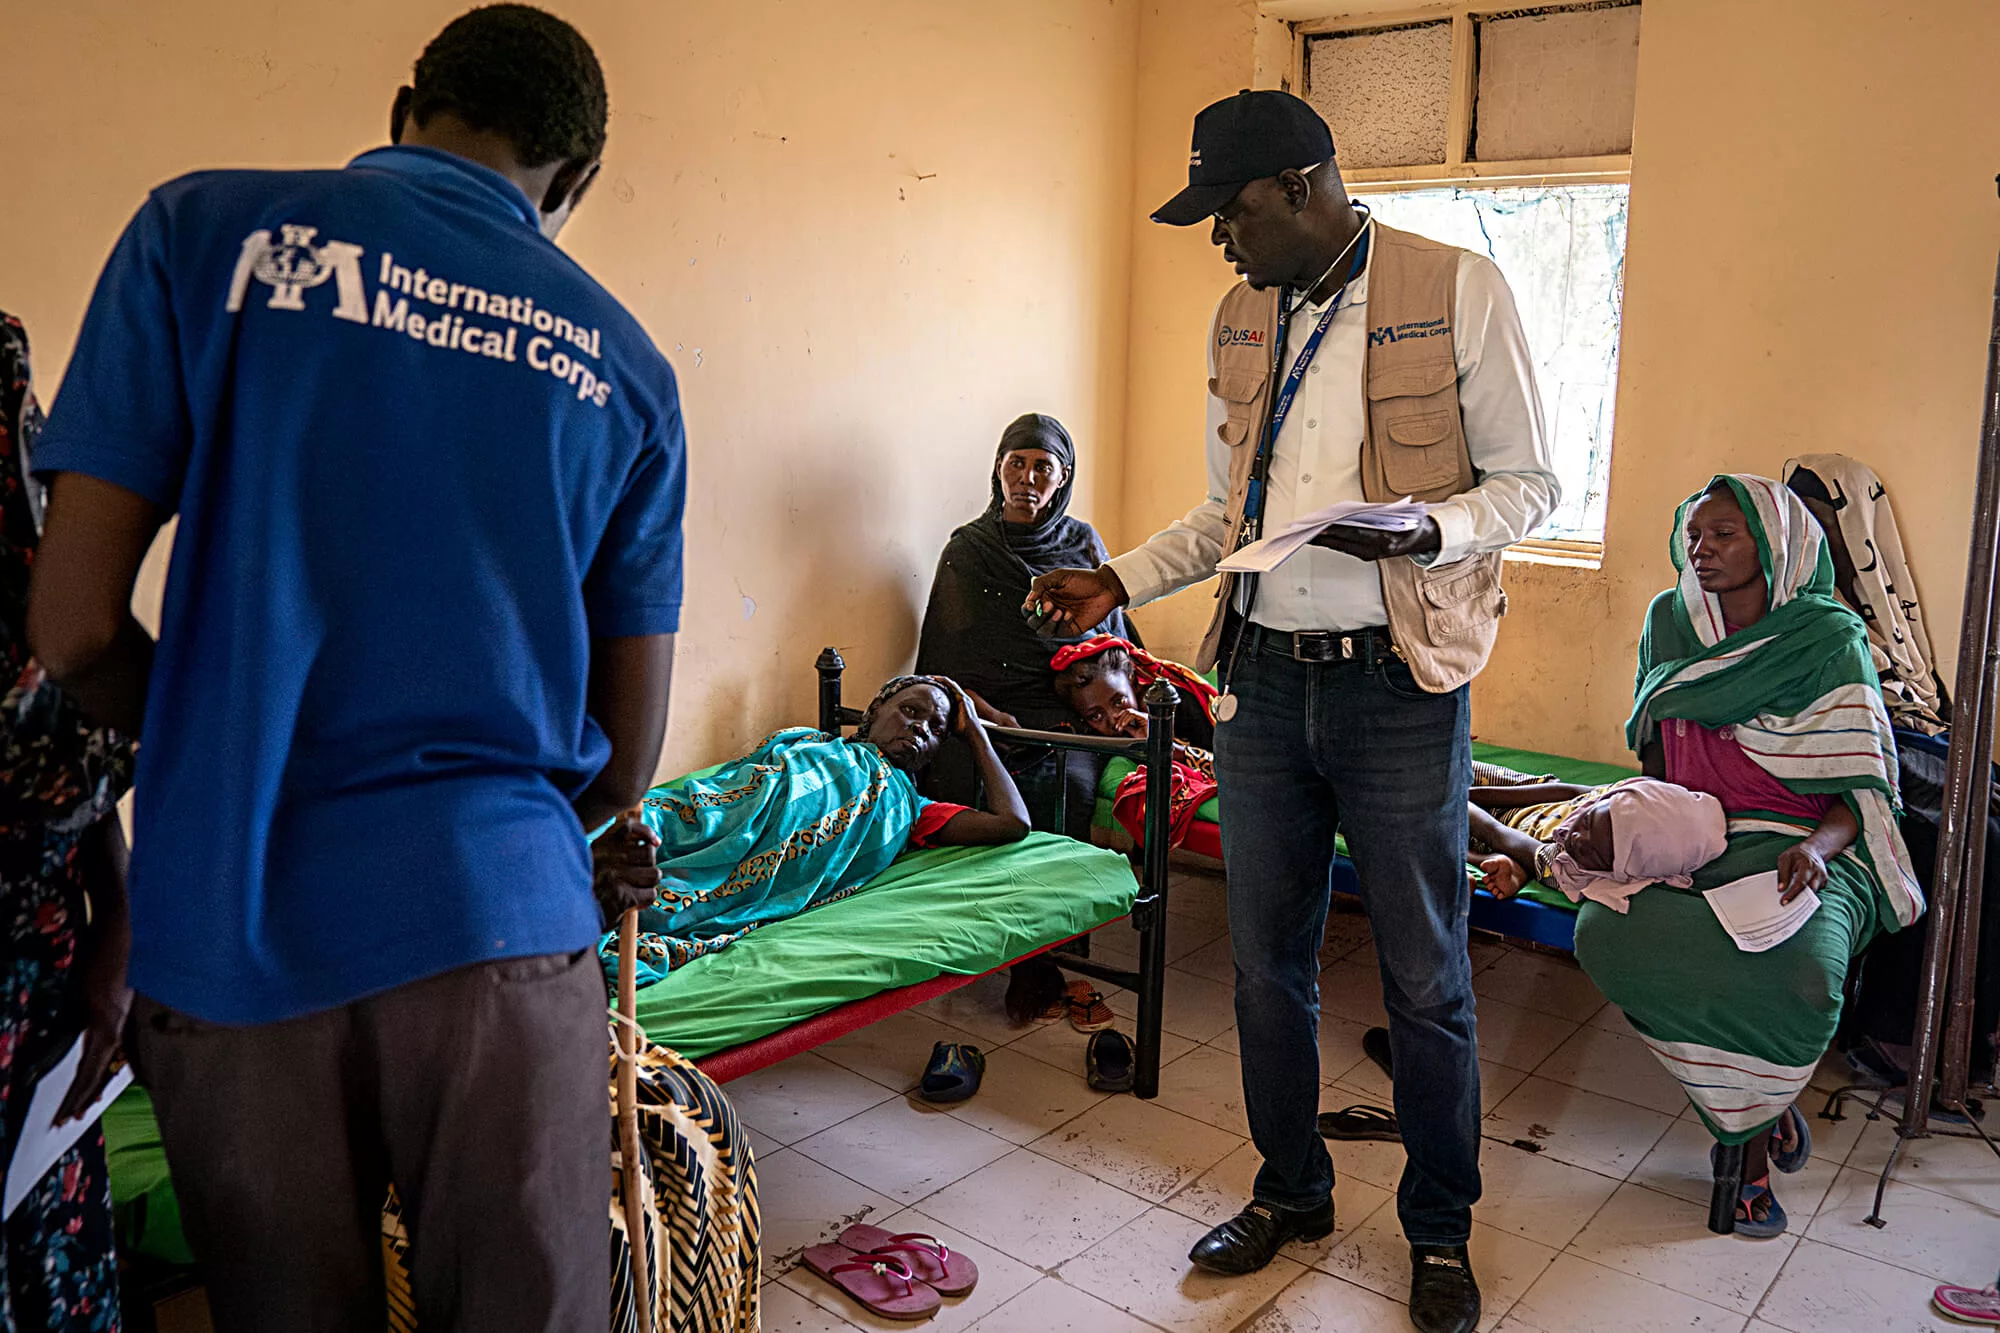 Dr. William and other staff members meet with patients at one of the International Medical Corps health clinics in Renk, South Sudan.